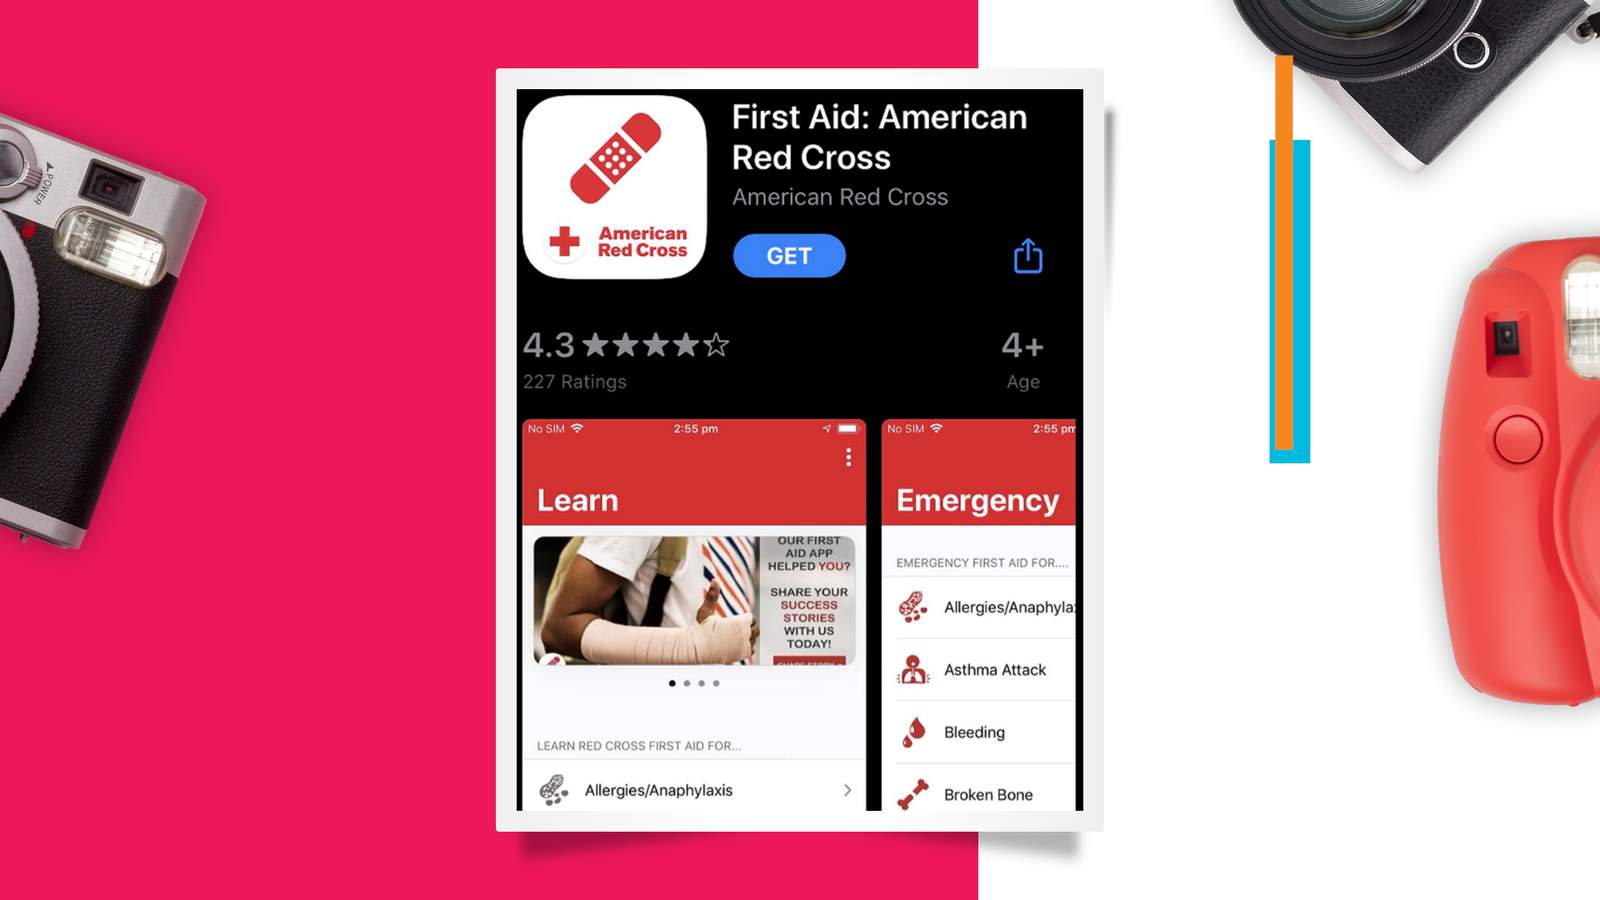 FIRST AID: AMERICAN RED CROSS